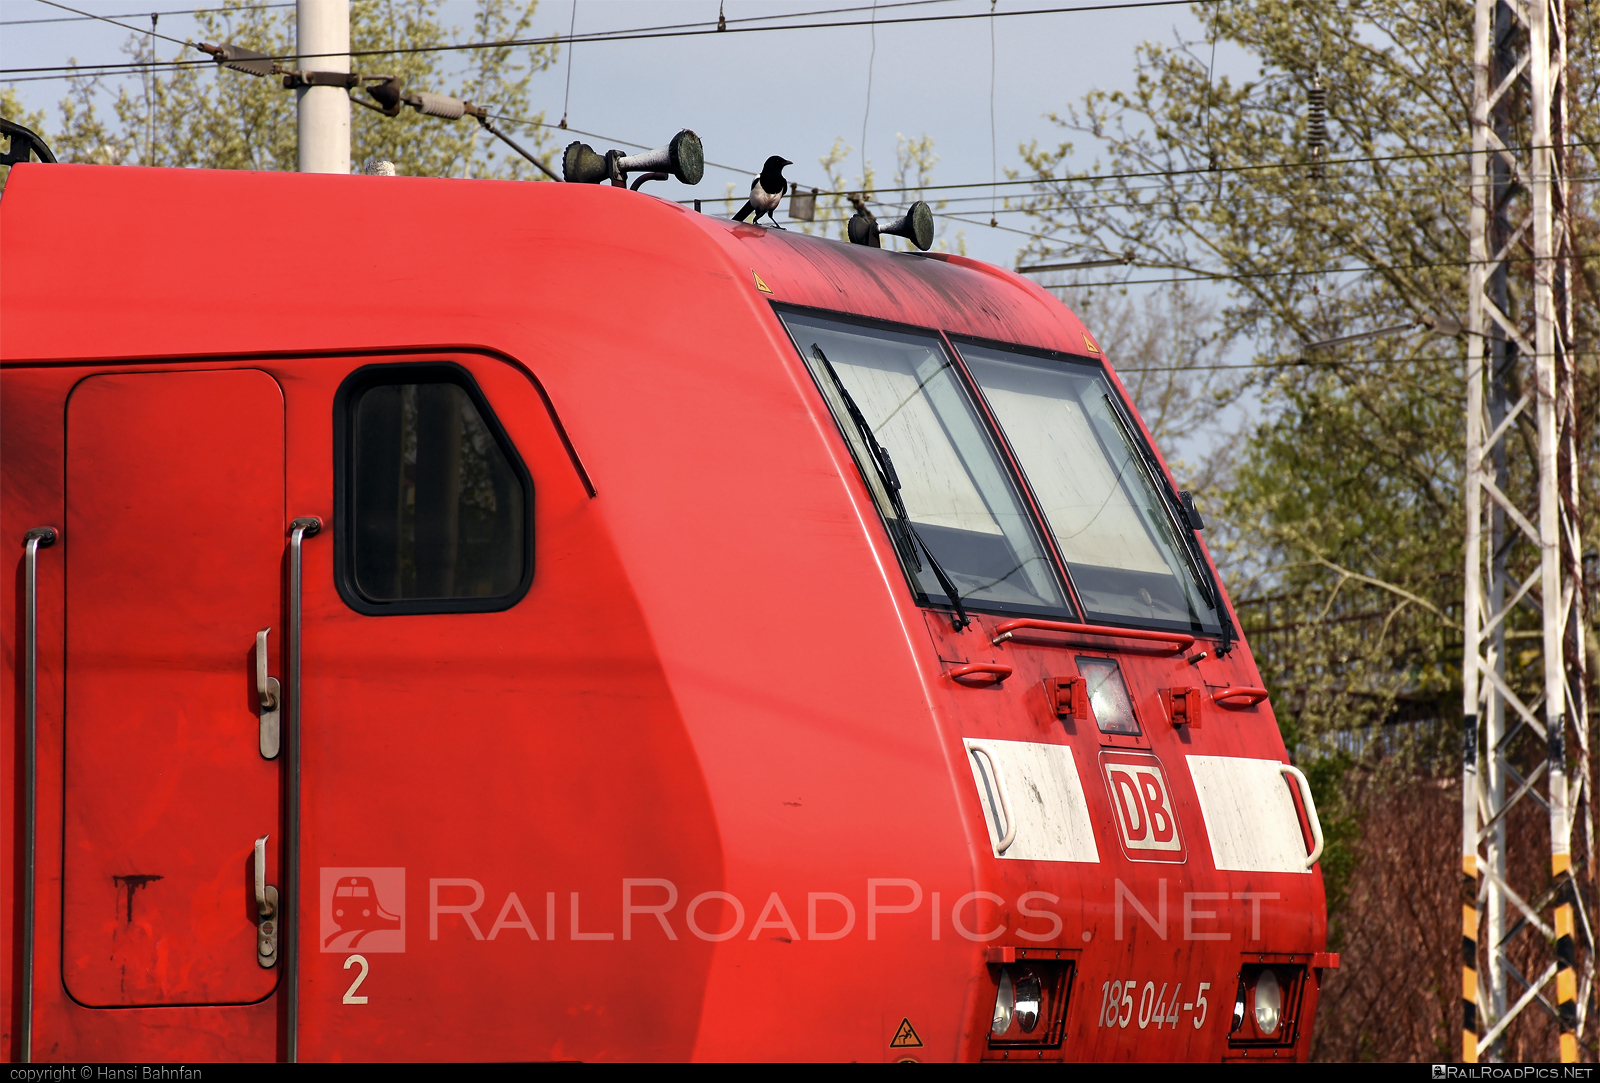 Bombardier TRAXX F140 AC1 - 185 044-5 operated by DB Cargo AG #bombardier #bombardiertraxx #db #dbcargo #dbcargoag #deutschebahn #traxx #traxxf140 #traxxf140ac #traxxf140ac1